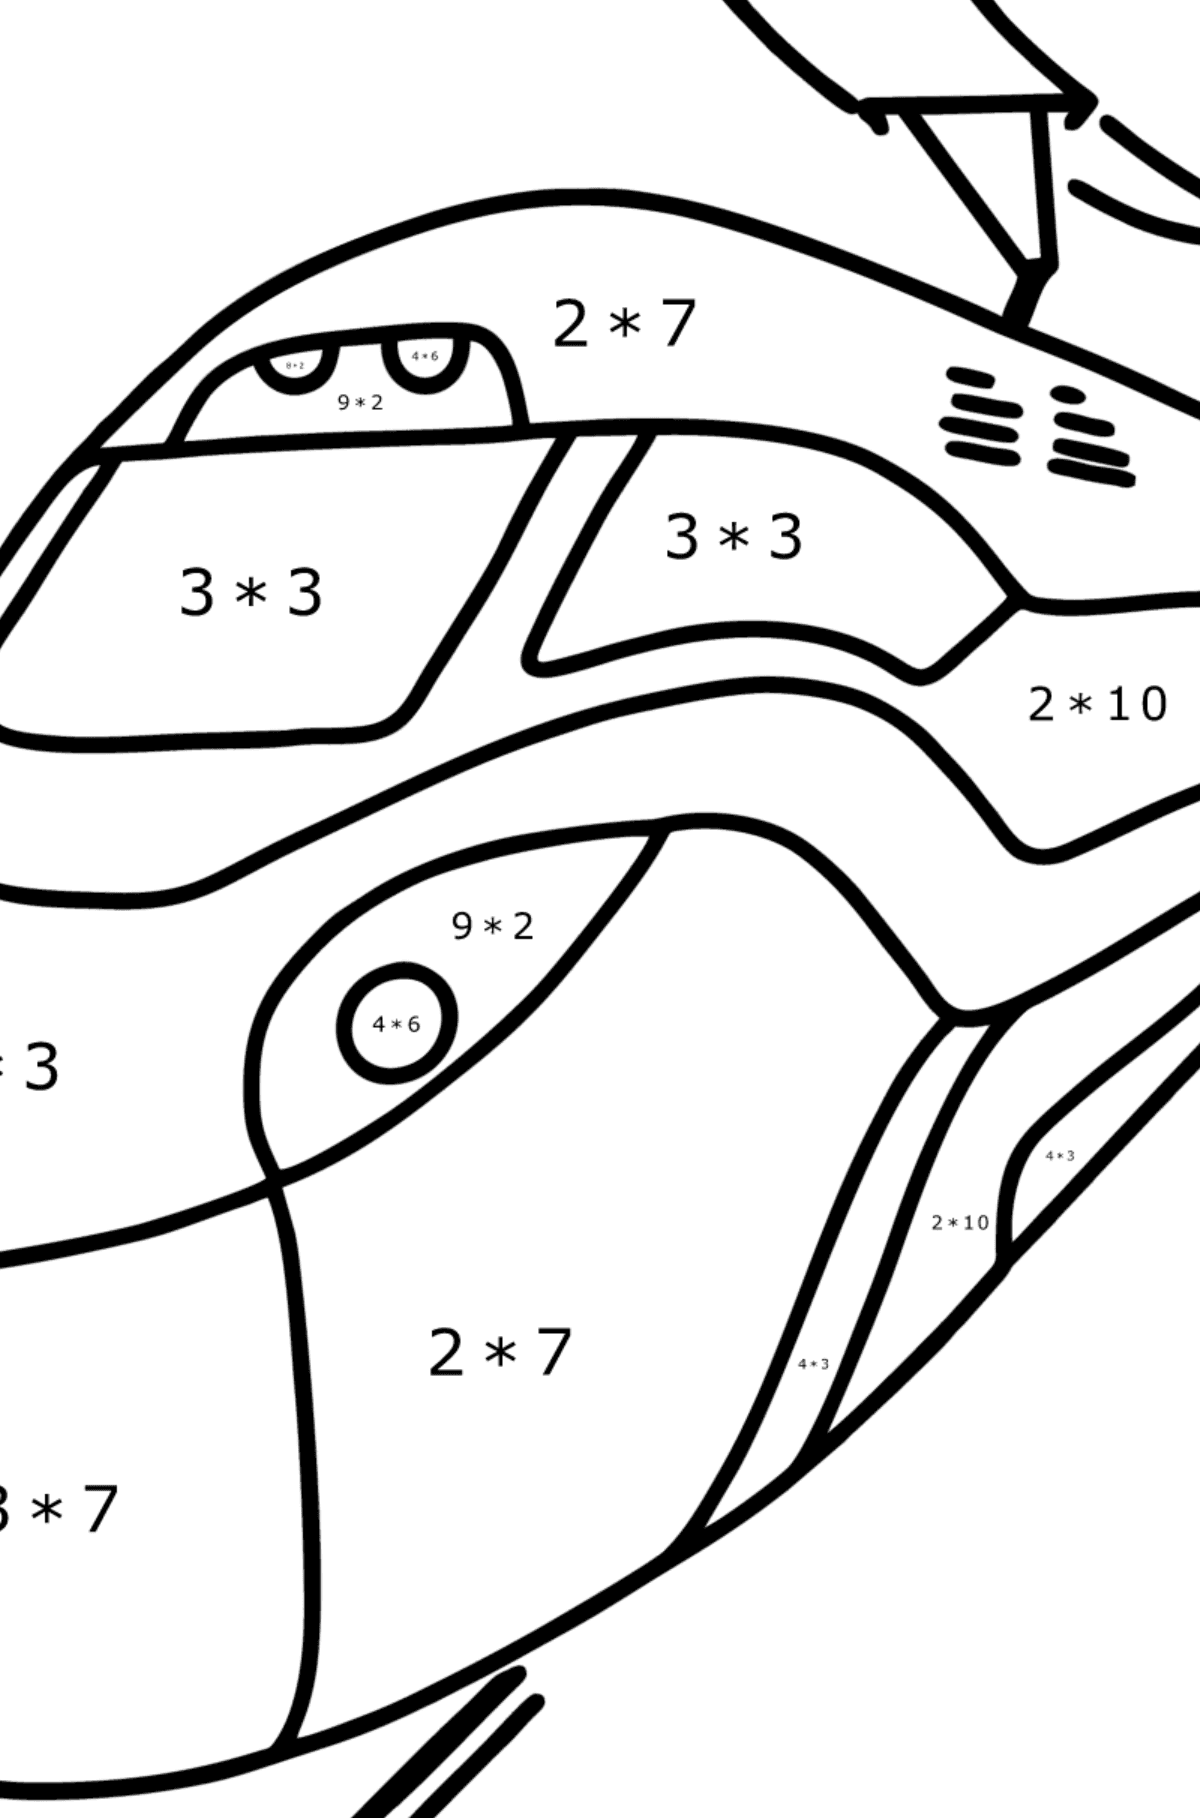 Train coloring page online - Math Coloring - Multiplication for Kids